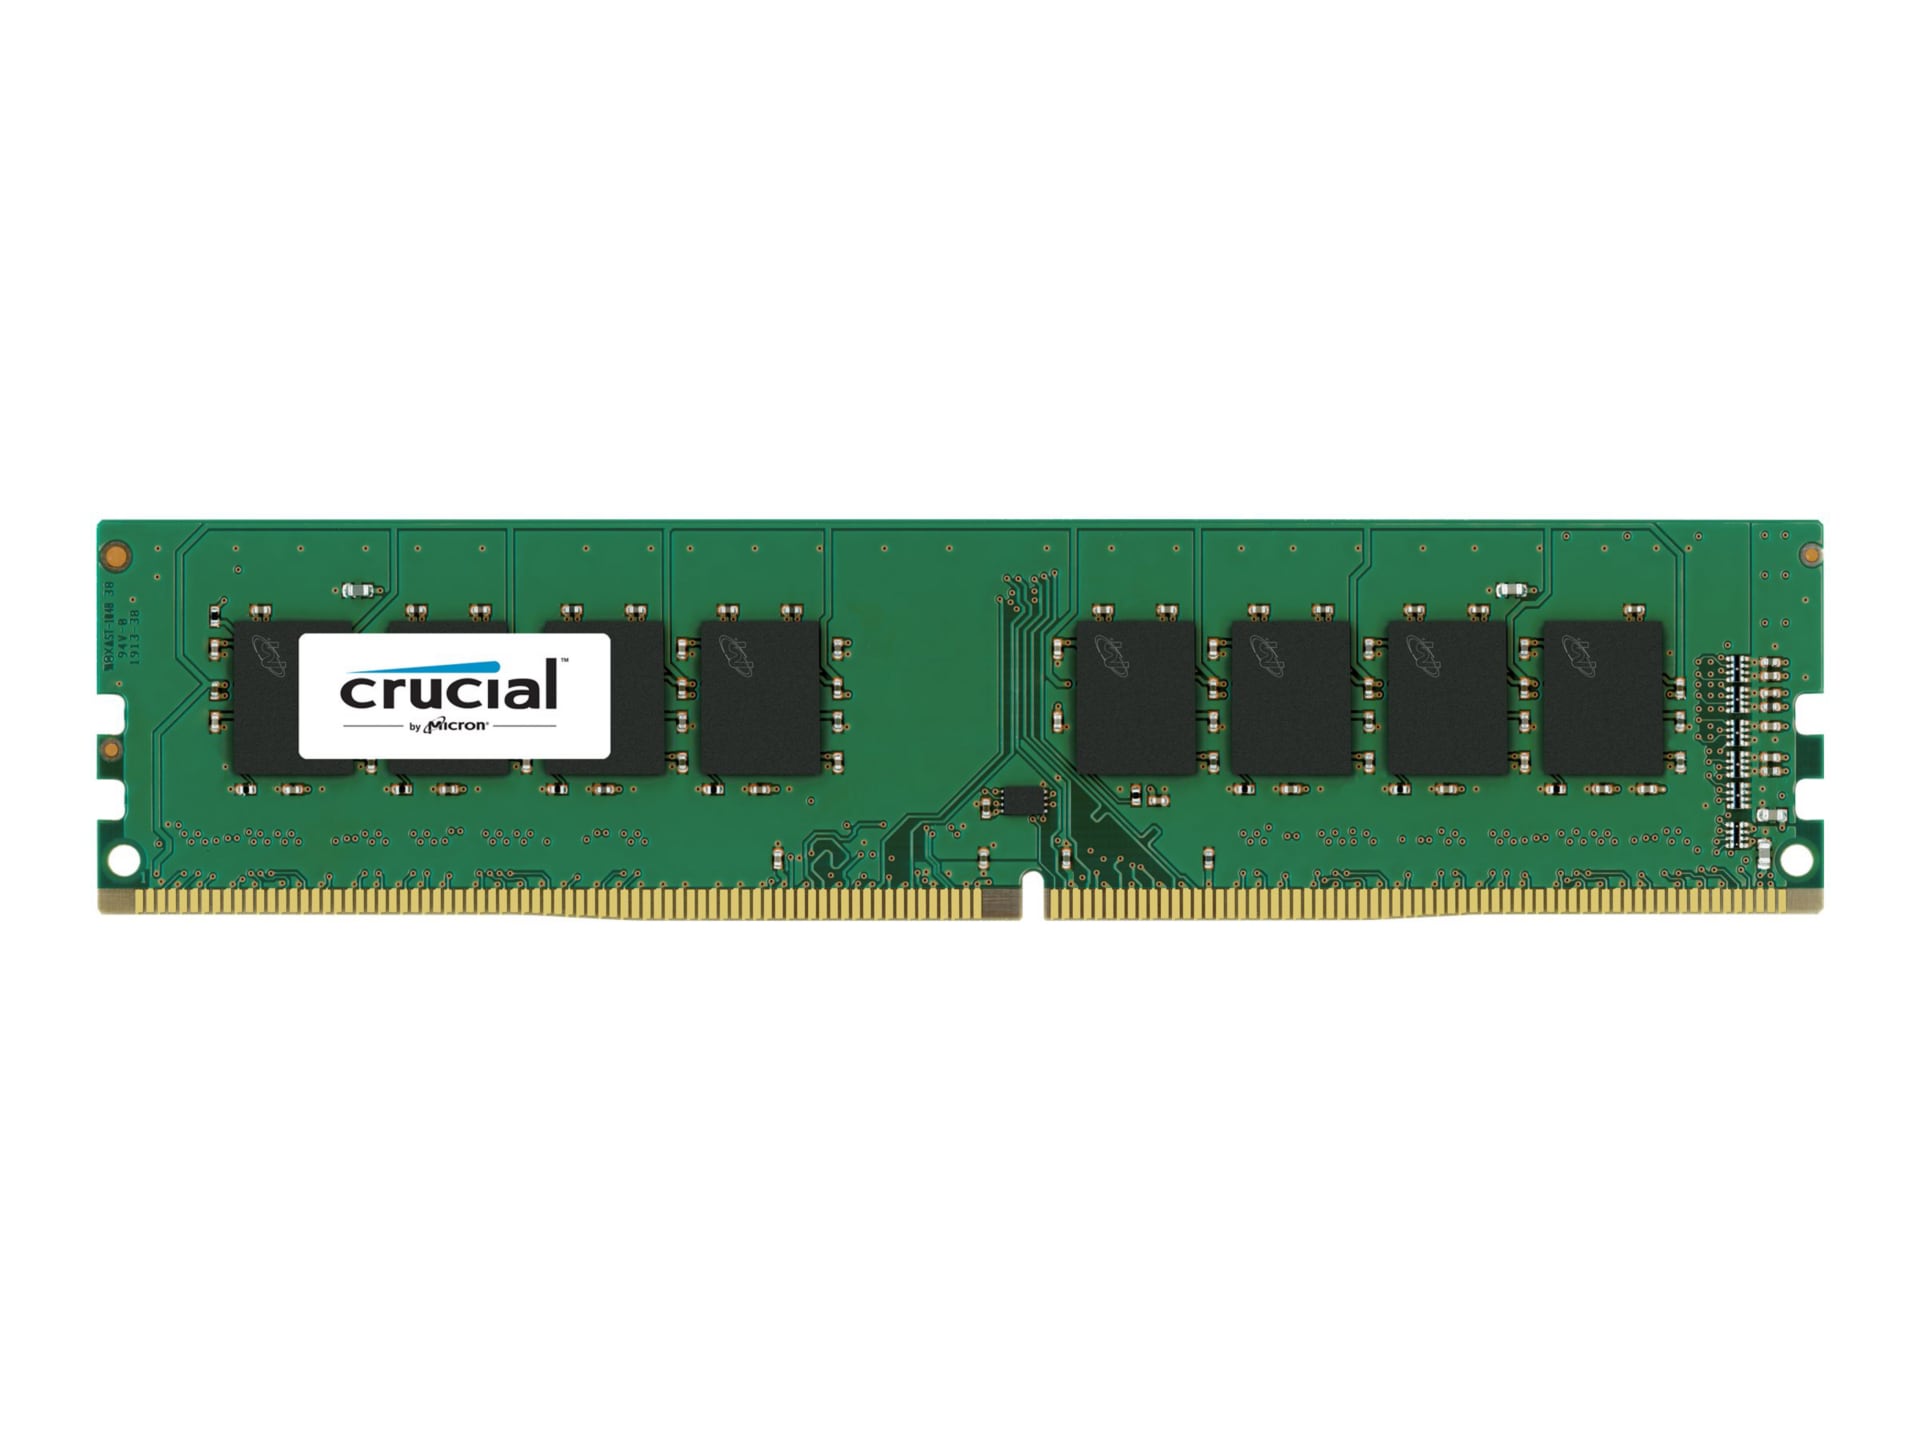 Crucial - DDR4 - module - 8 GB - DIMM 288-pin - 2400 MHz / PC4-19200 -  unbuffered - CT8G4DFS824A - Computer Memory